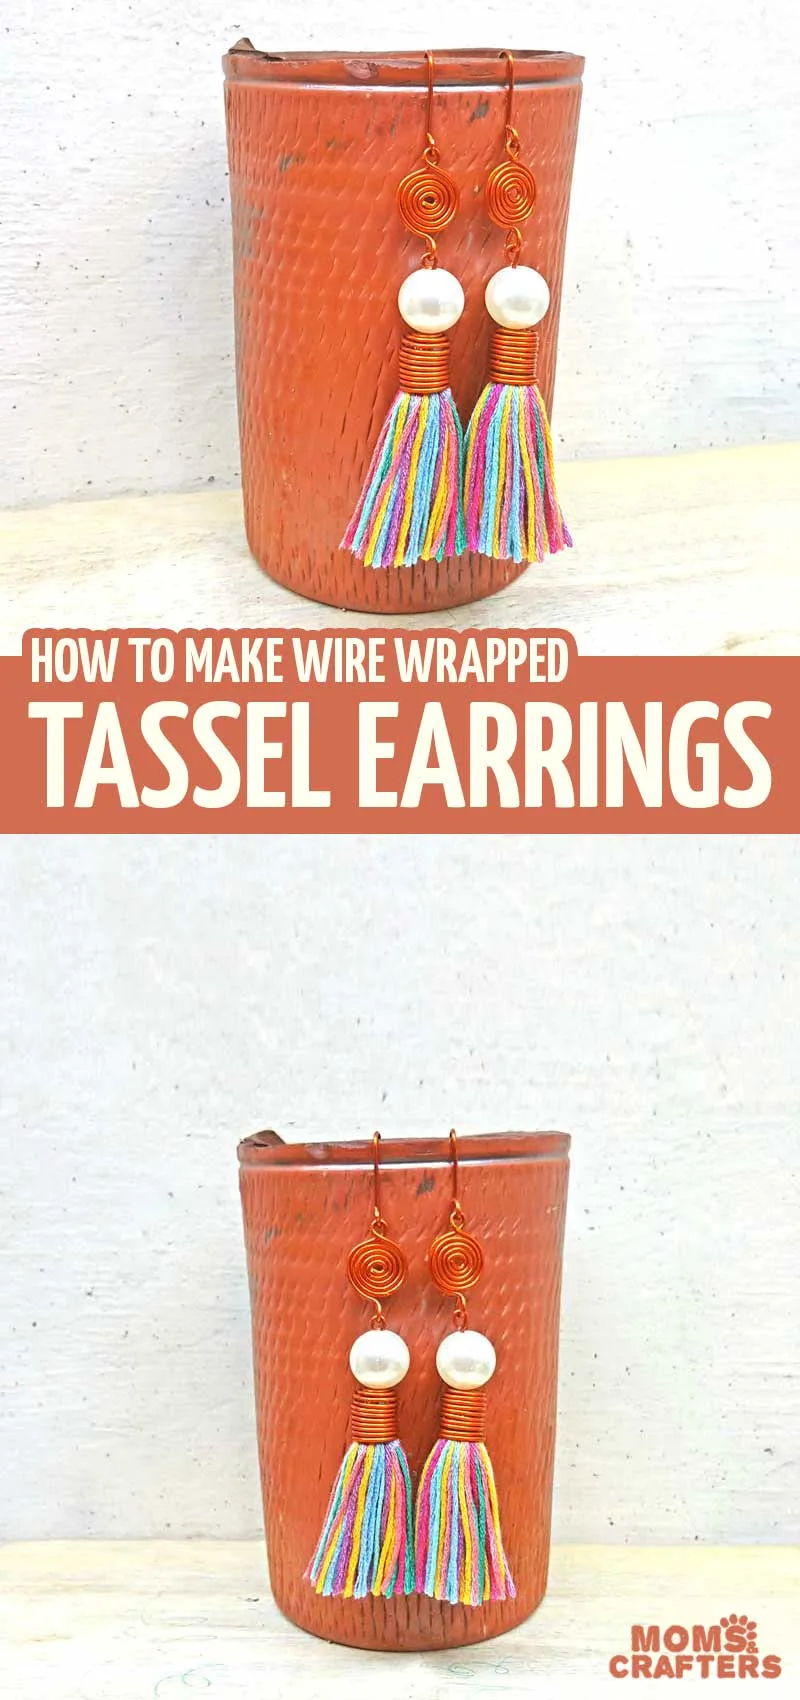 Learn how to make tassel earrings in this fun and quirky DIY jewelry making tutorial for beginners! You'll learn this basic wire wrapping idea - and it's a perfect craft for teens!